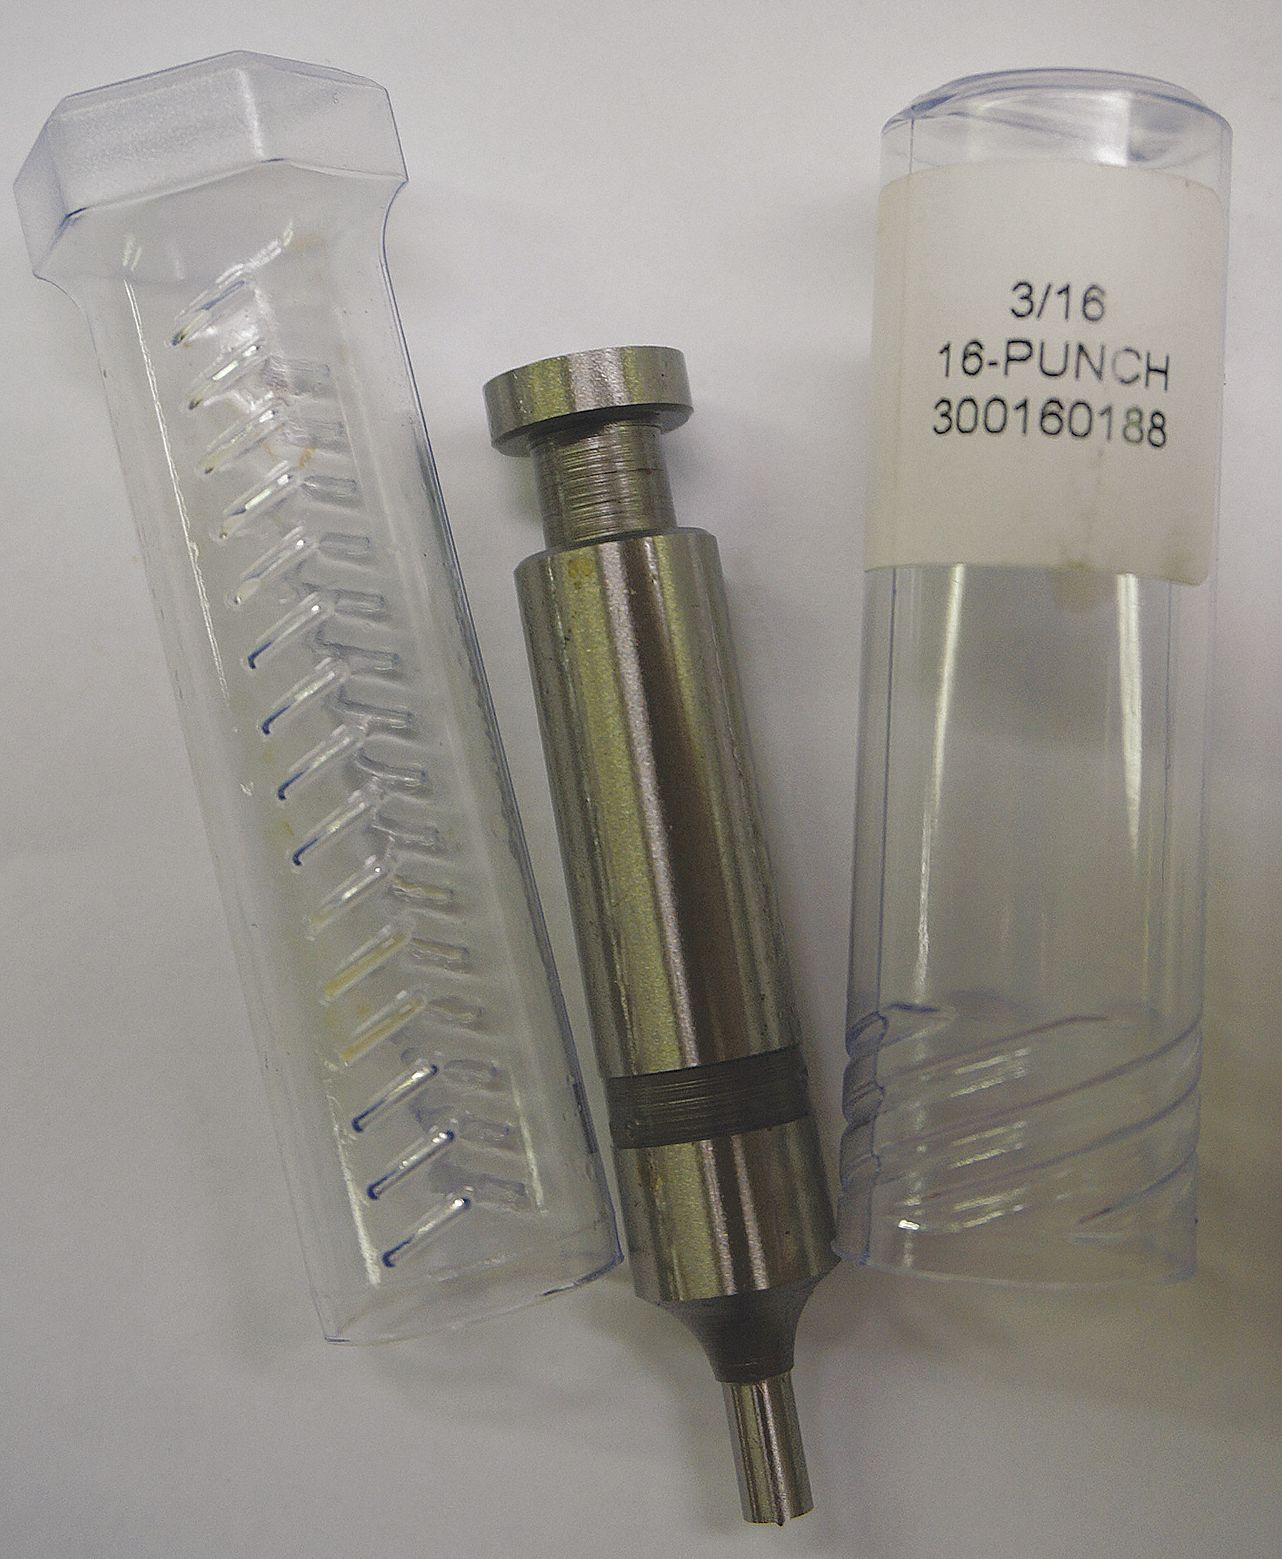 Punch: 222 ga Capacity (Steel), 16 Punch, 3/16 in Punch Dia, Round